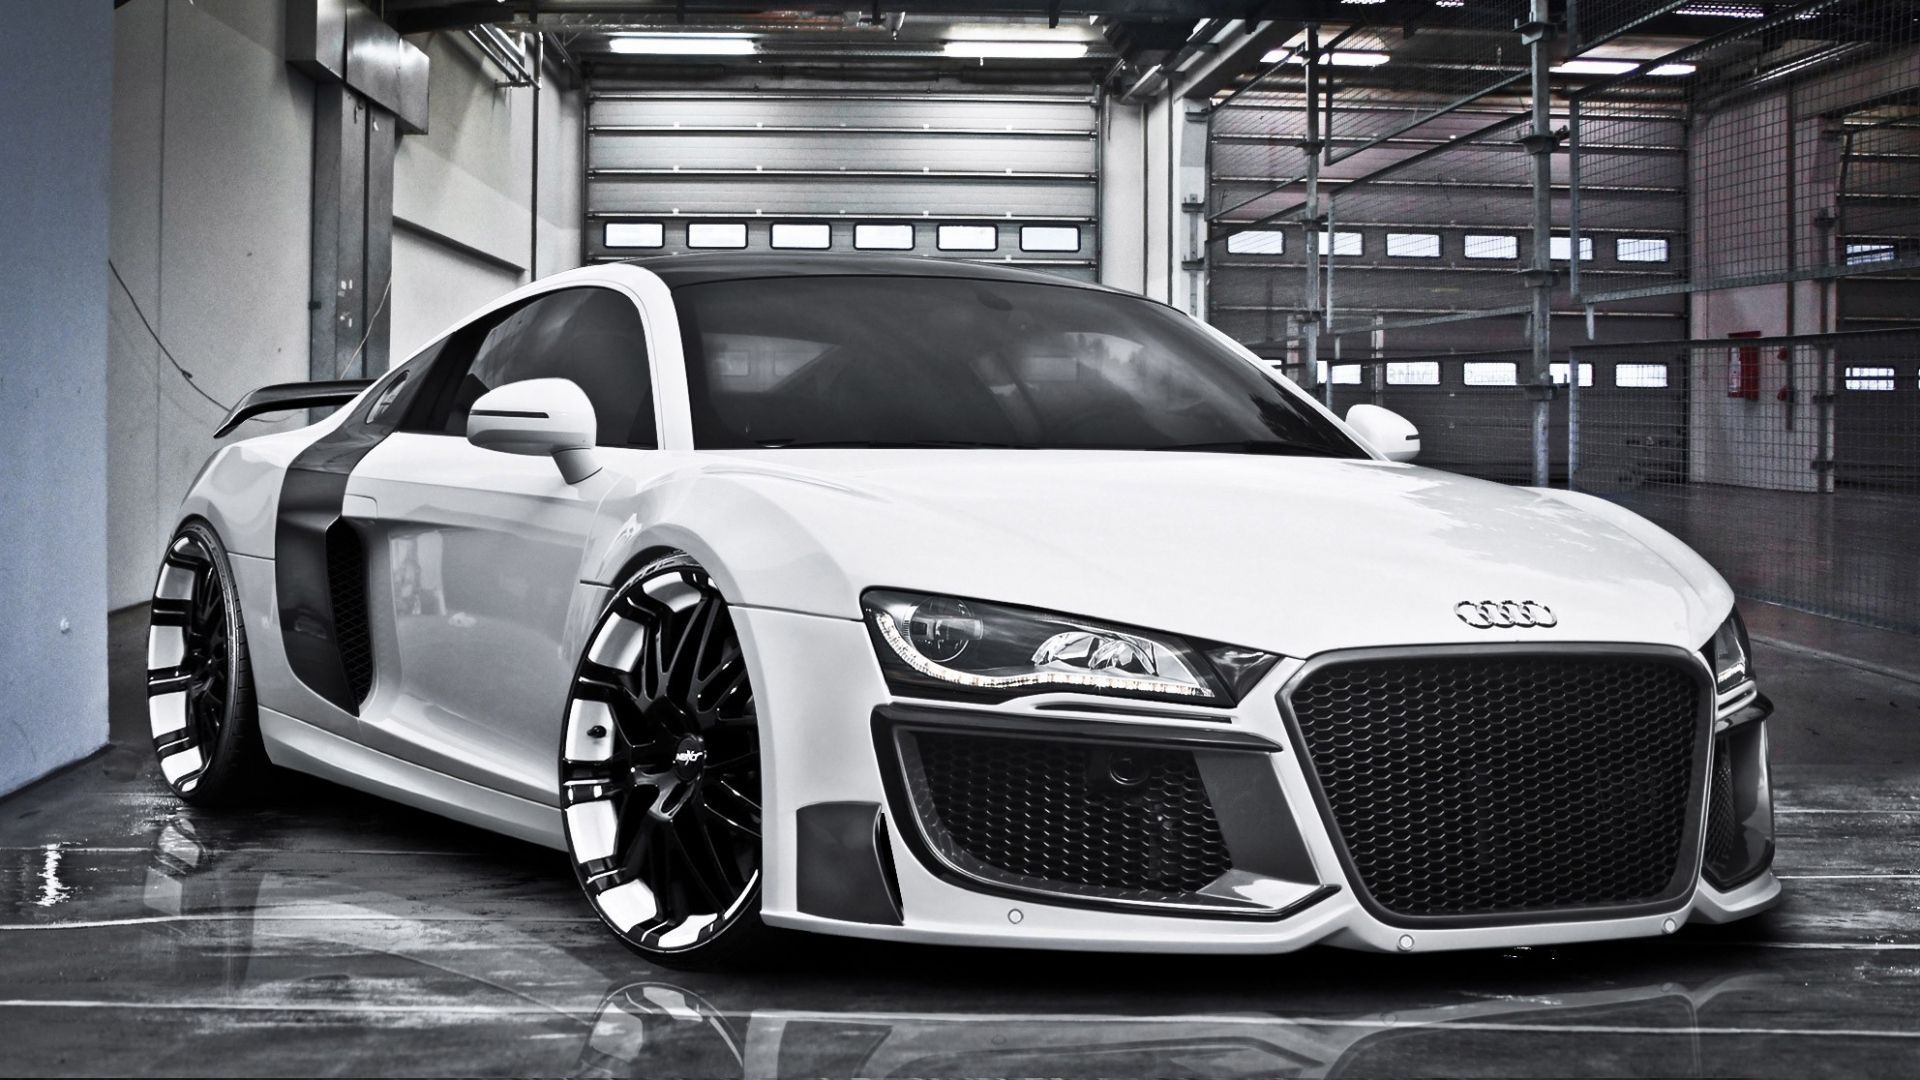 Audi r8 wallpaper 1920x1080 Archives - HD Widescreen Wallpapers